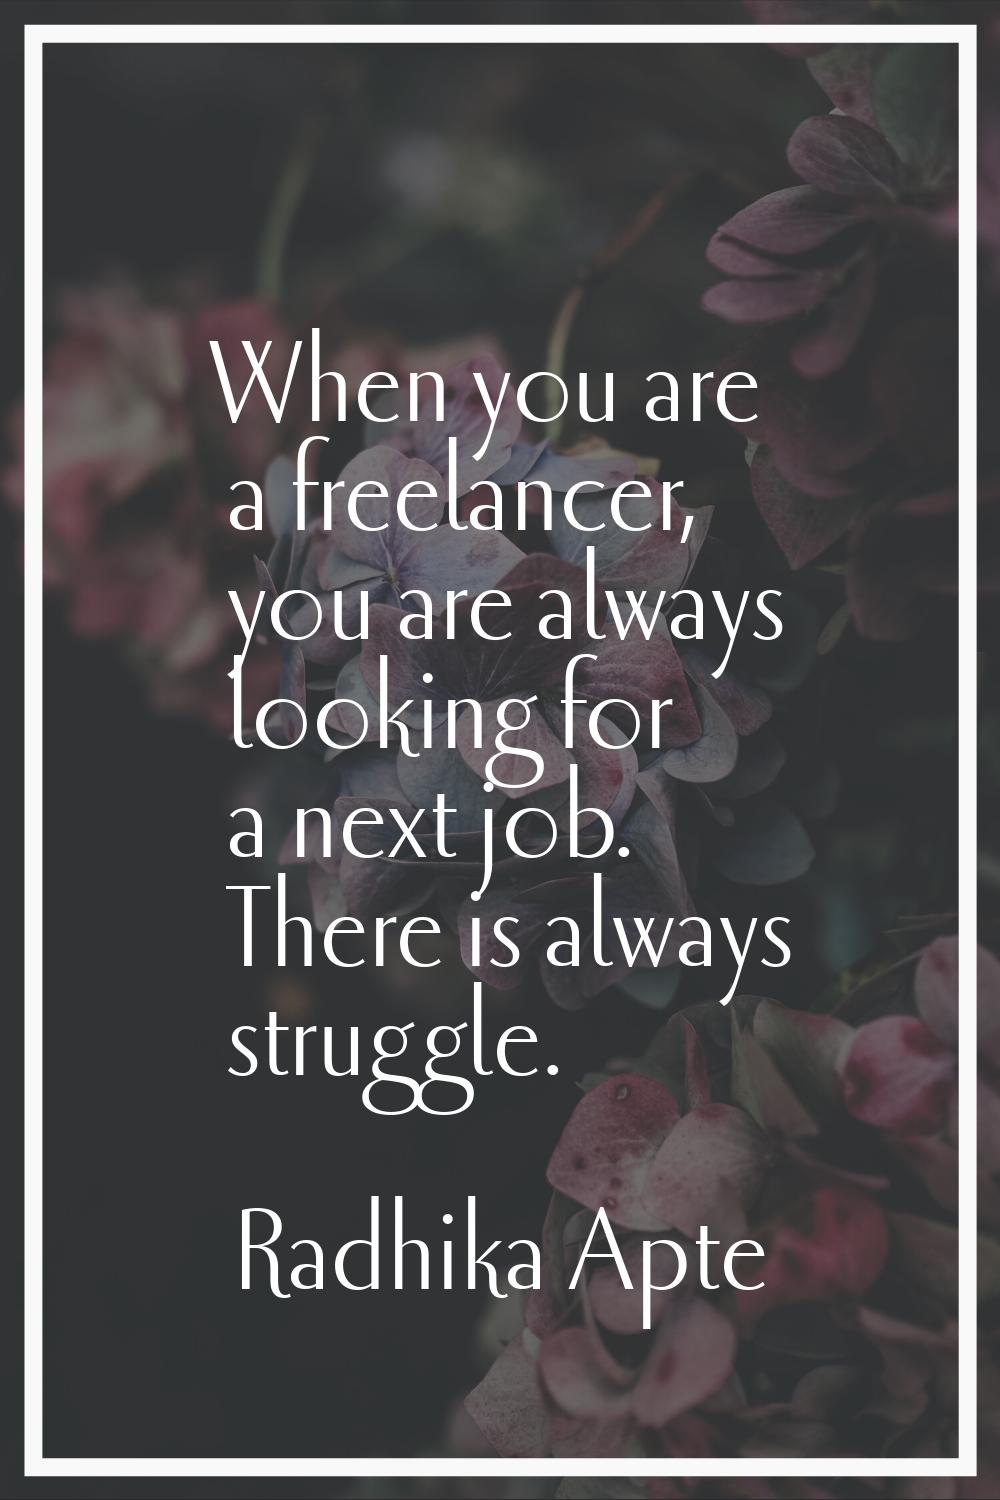 When you are a freelancer, you are always looking for a next job. There is always struggle.